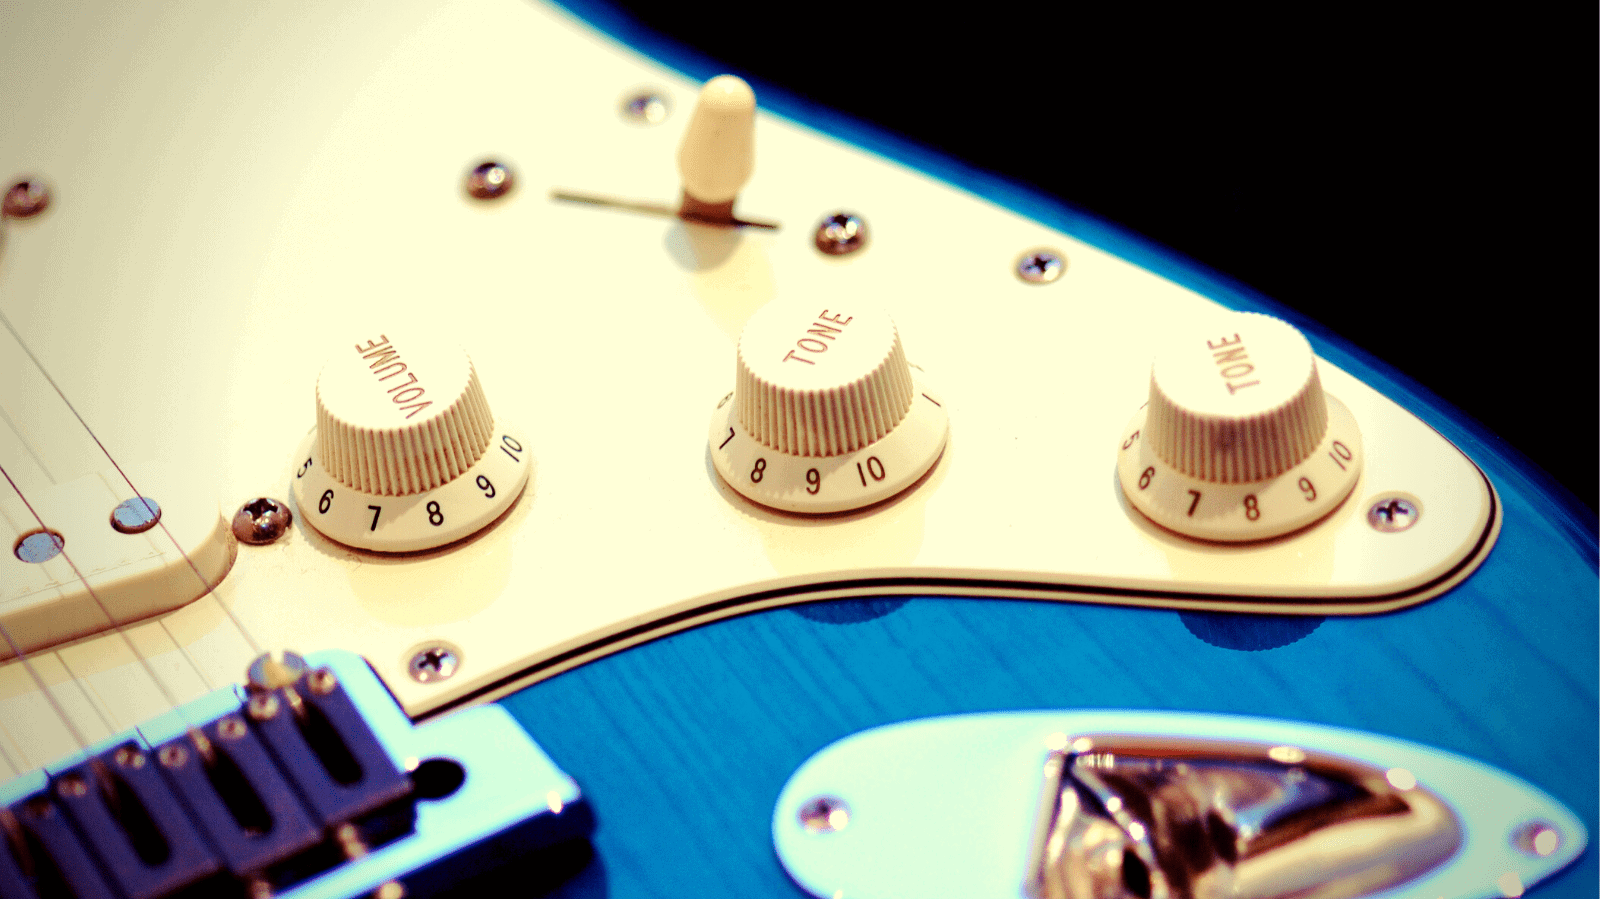 Volume and tone knobs of an electric guitar